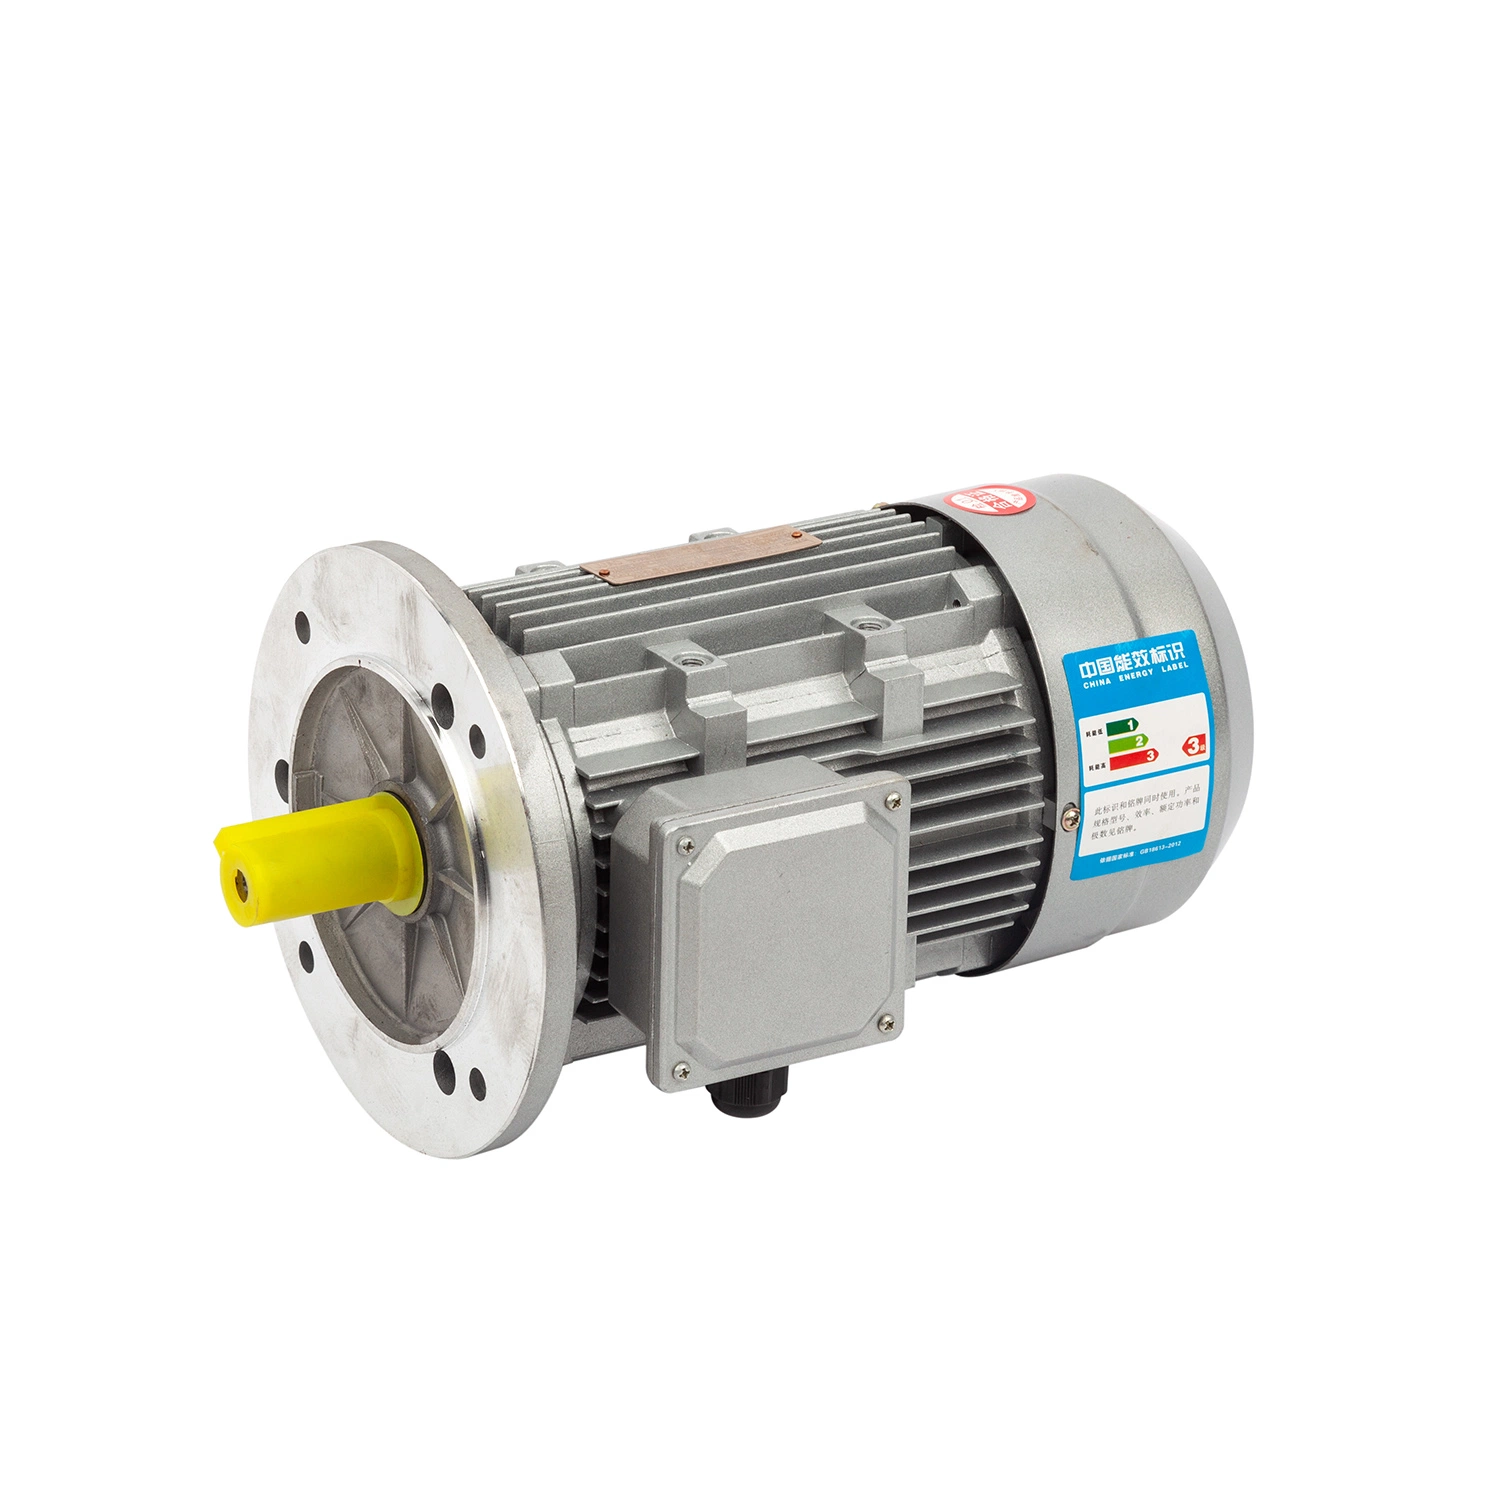 Ye2-71m1-4 Aluminum Shell Horizontal Three-Phase Asynchronous Motor Can Be Used in Mixer Lathe Oil Pump Vacuum Pump Air Compressor